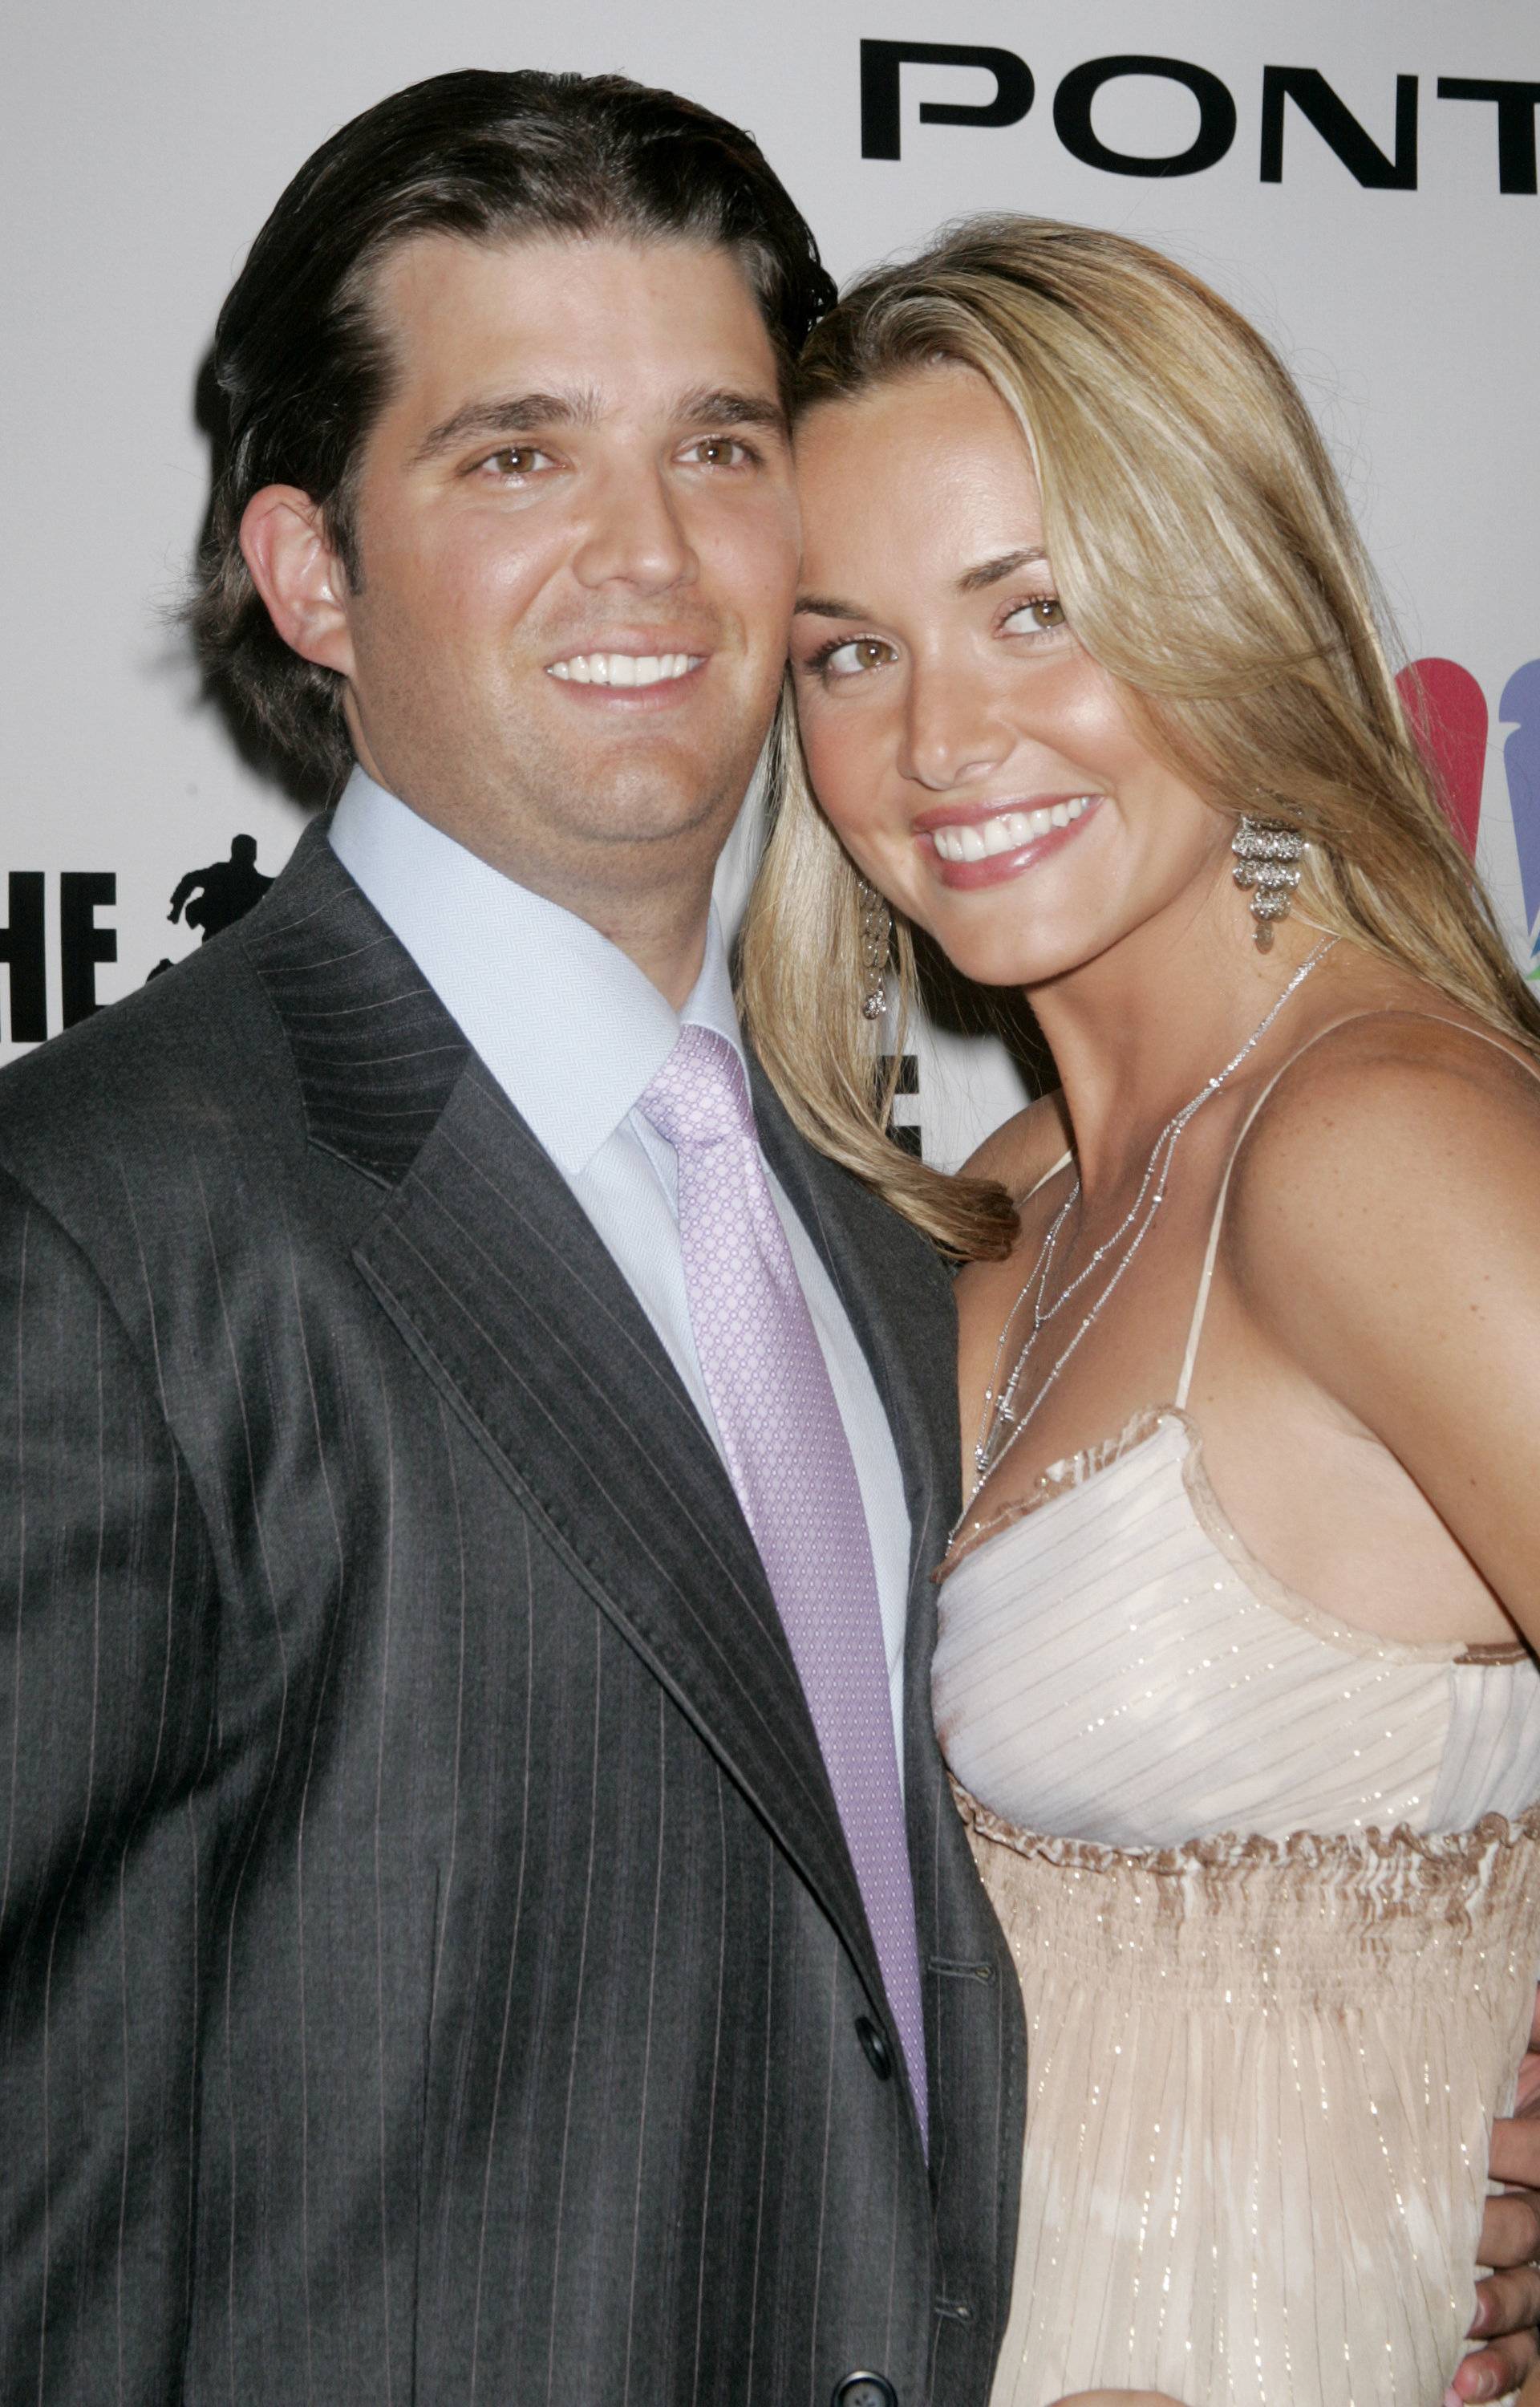 FILE PHOTO: Trump, Jr. and wife Vanessa arrive at party following finale of season five of reality television series 'The Apprentice' in Los Angeles